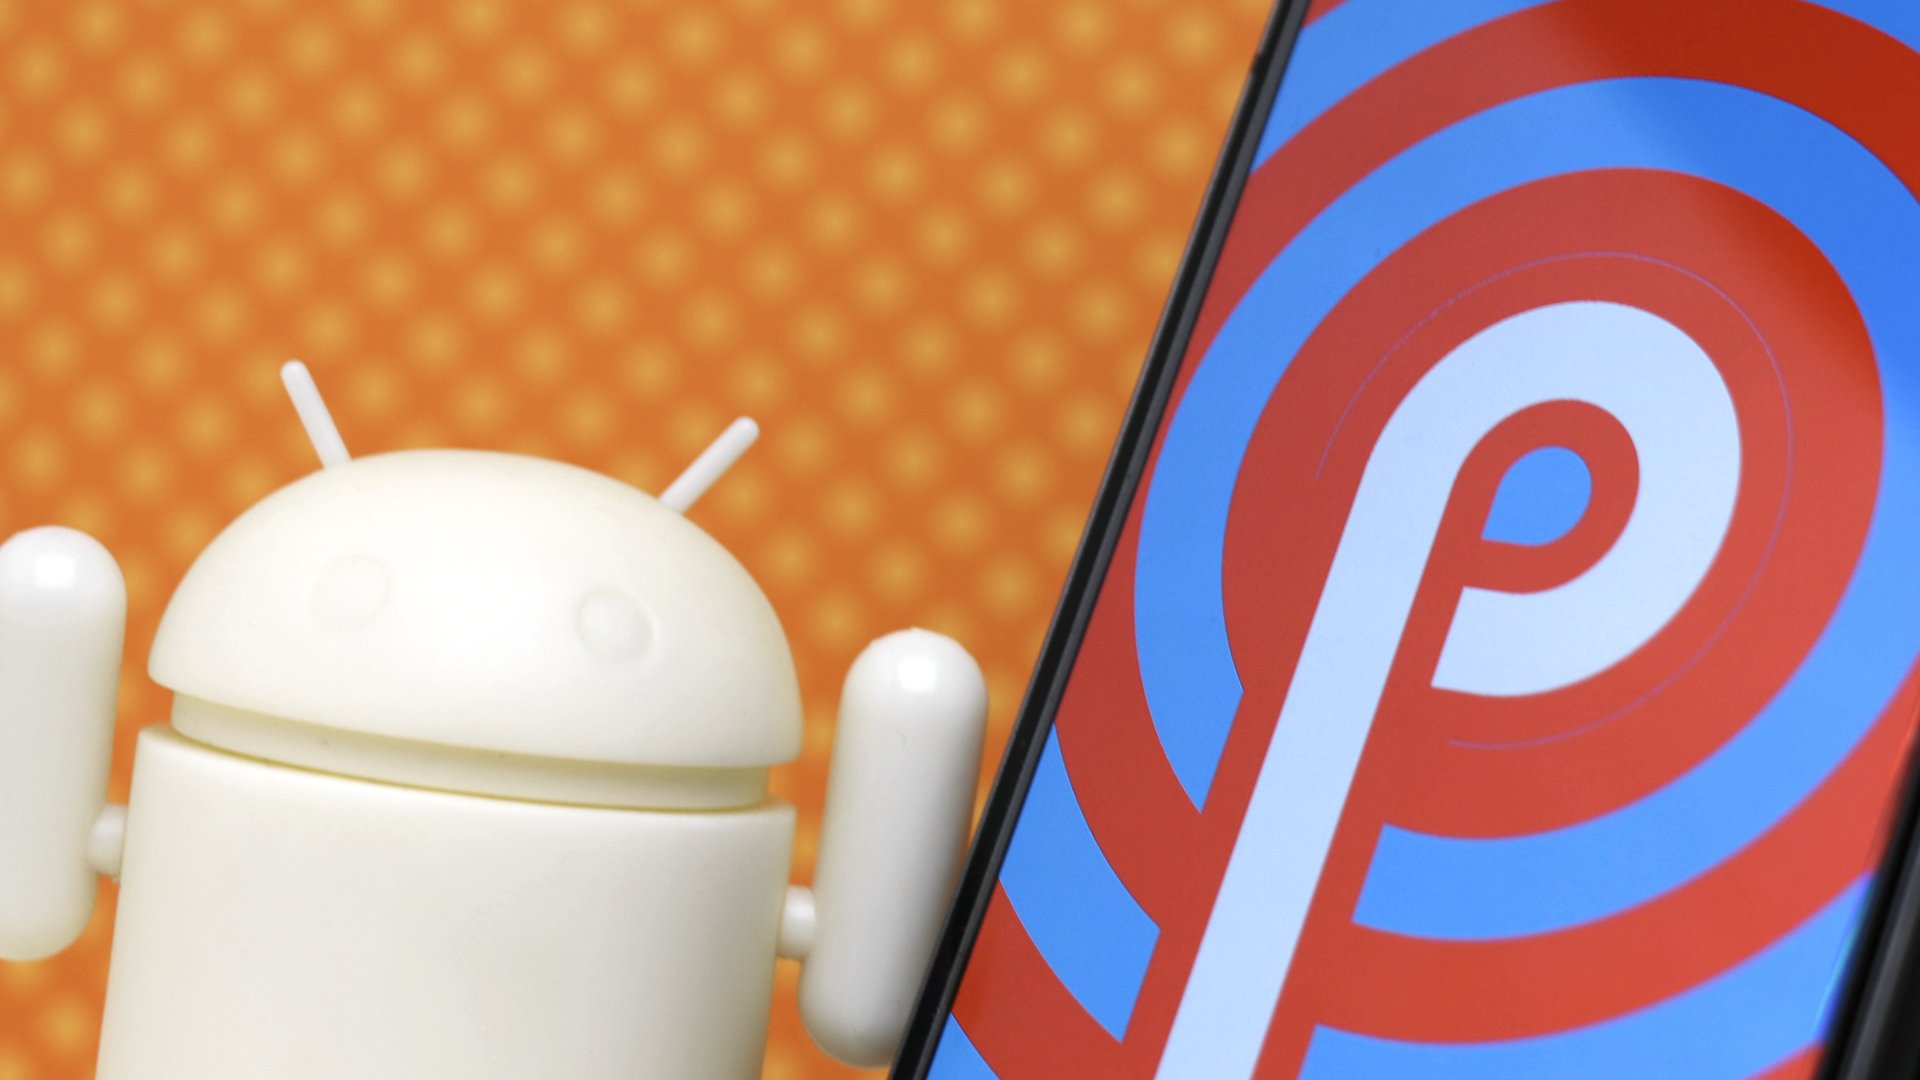 Android 9.0 Pie: Everything You Need to Know About Android 9